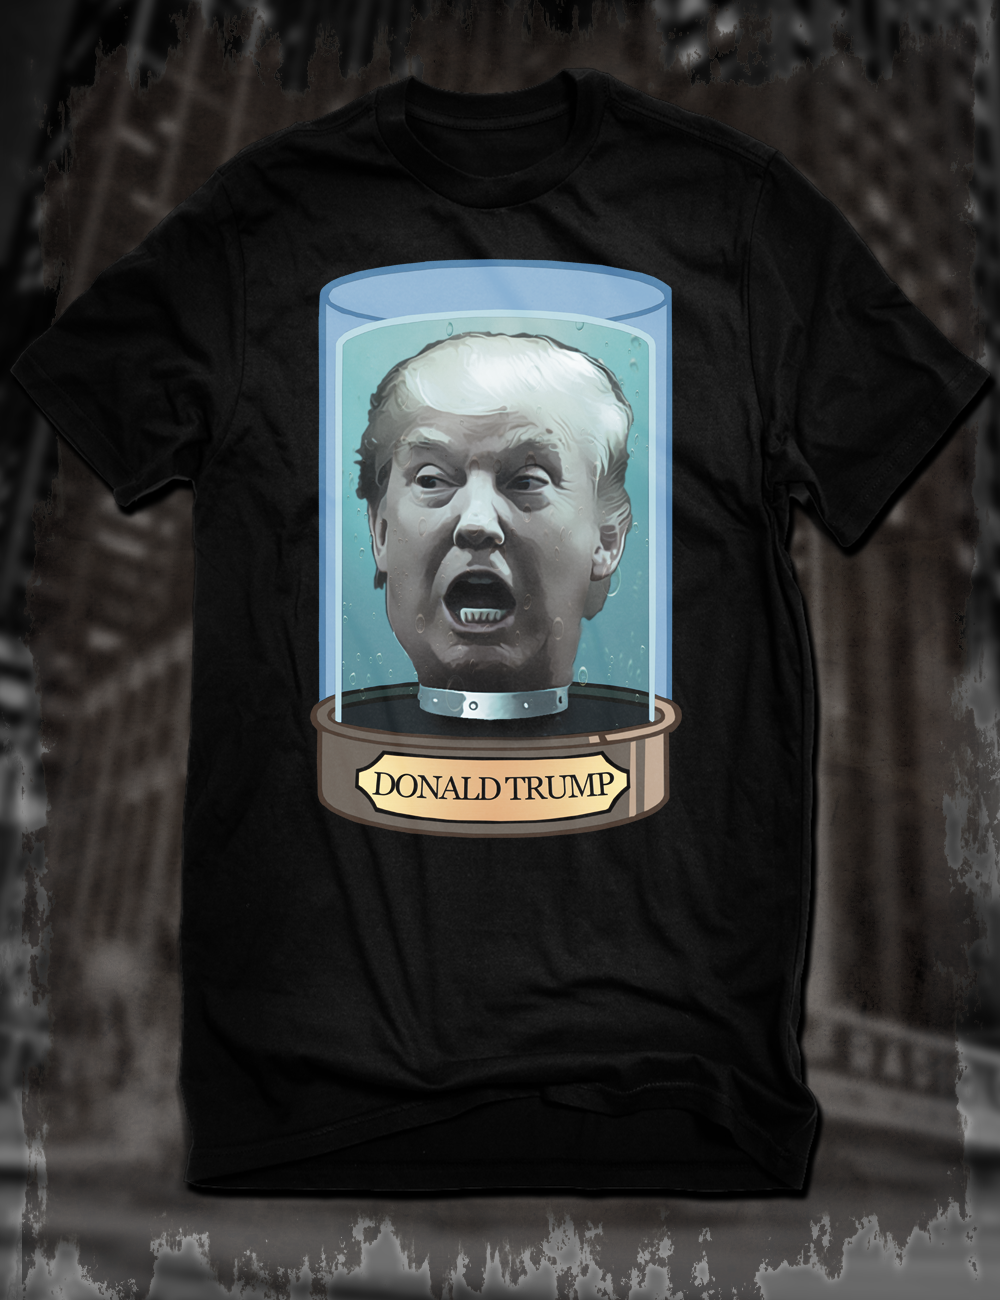 cement duft retning Donald Trump - Futurama T-Shirt from Hellwood Outfitters